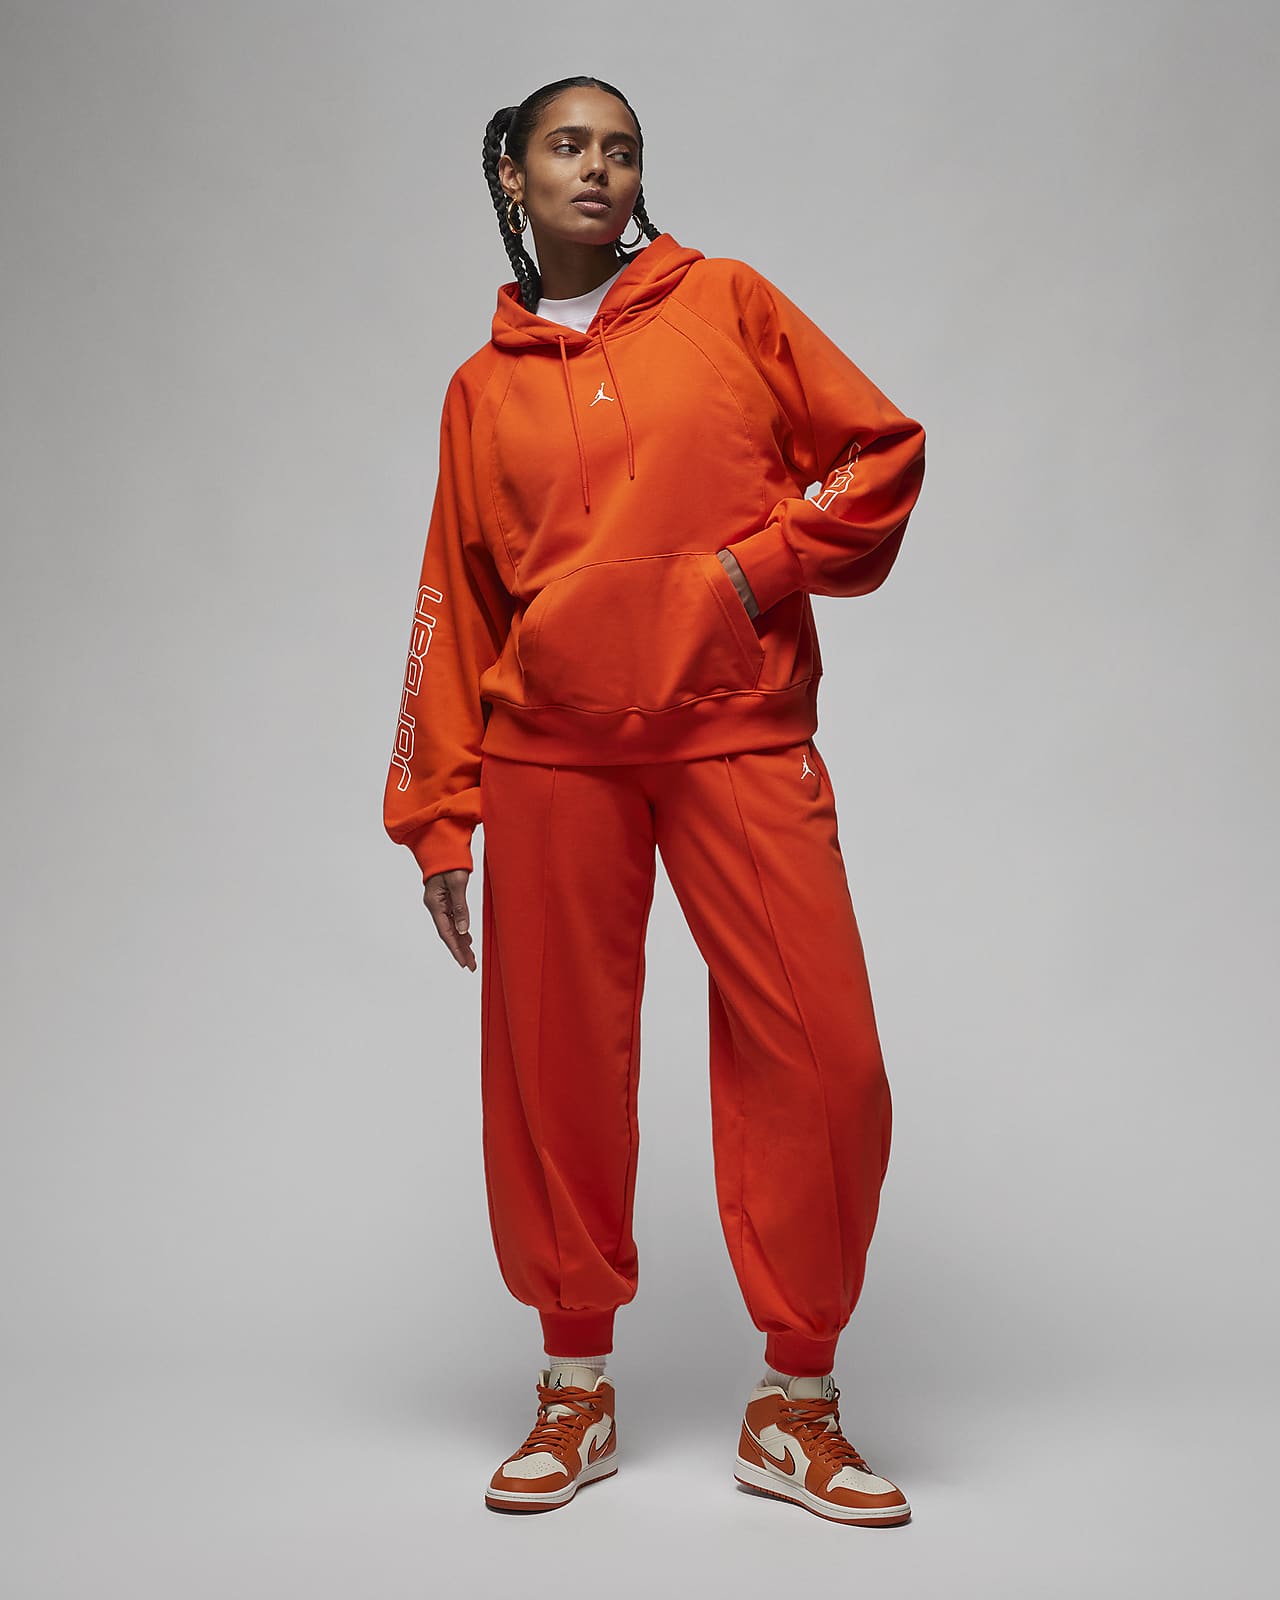 Women's Graphic Tracksuits, Women's Tracksuits